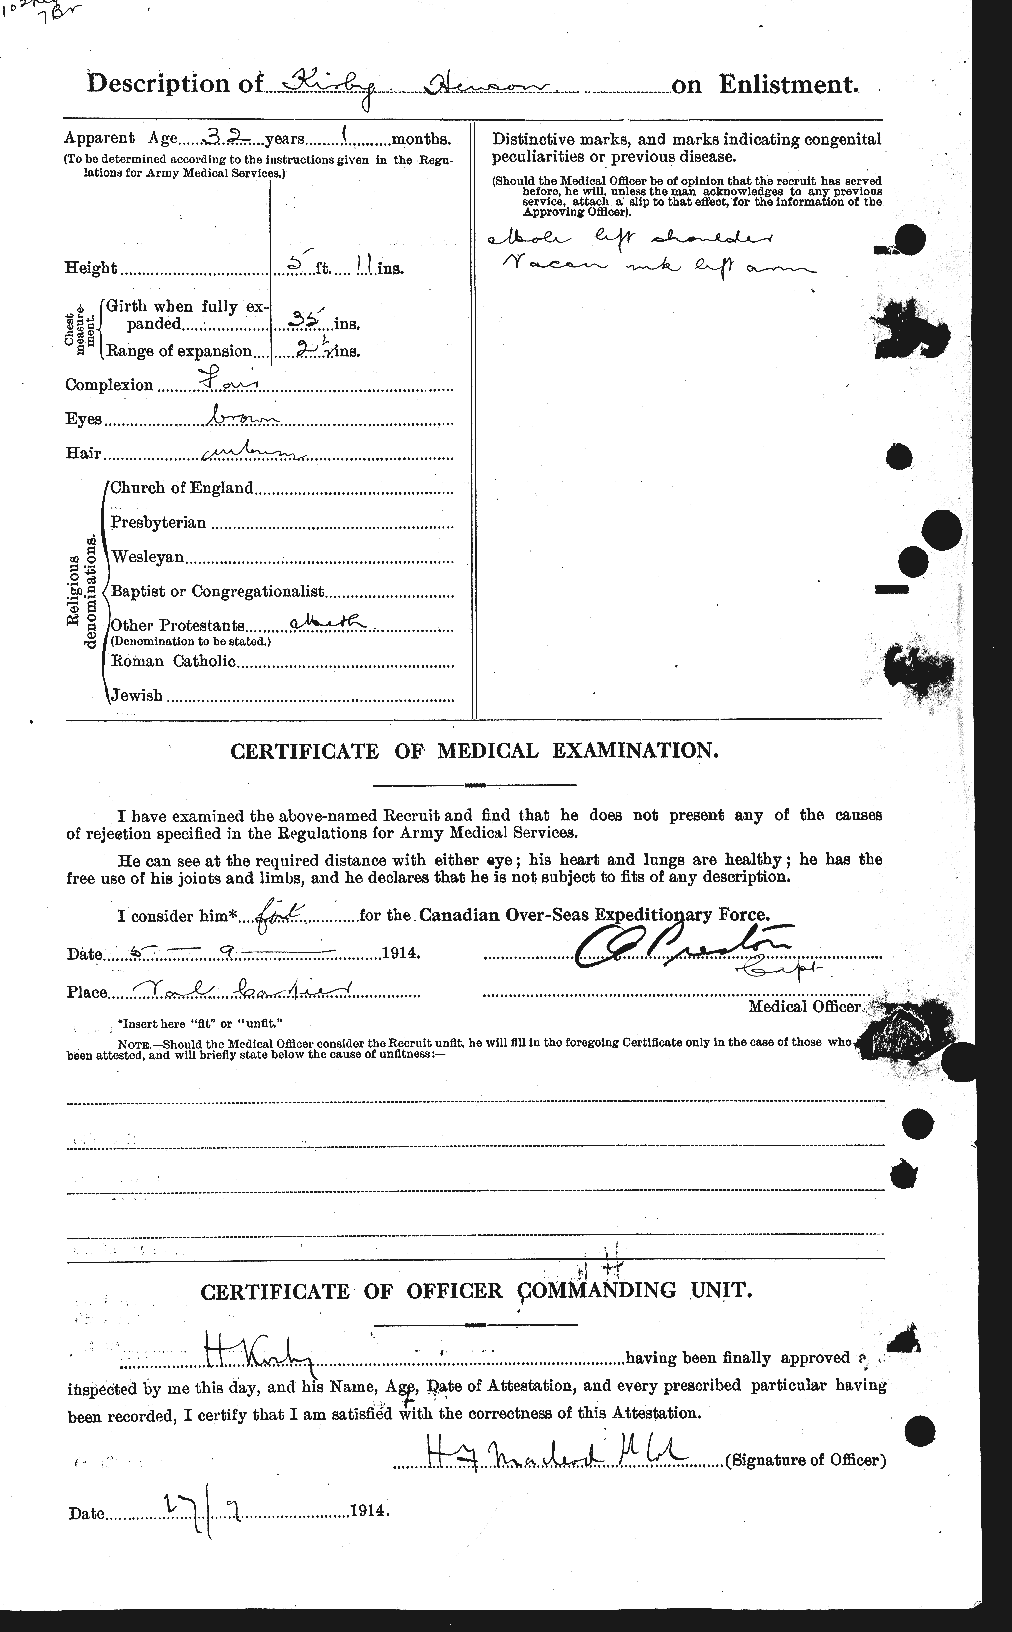 Personnel Records of the First World War - CEF 437214b